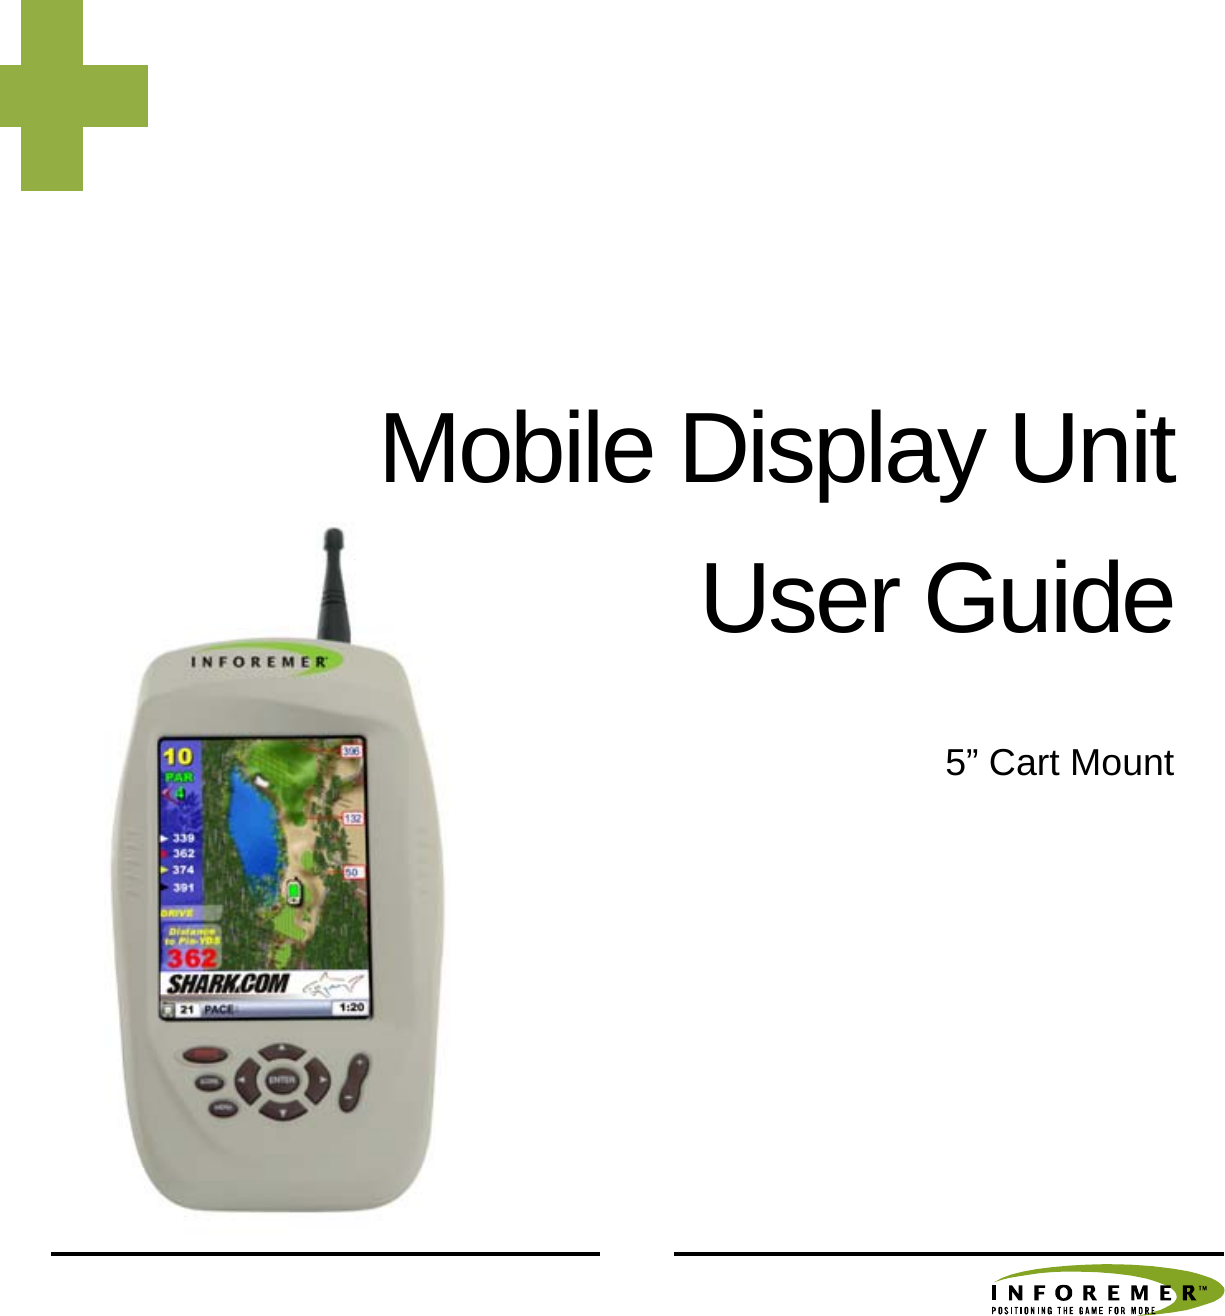     Mobile Display Unit  User Guide 5” Cart Mount  